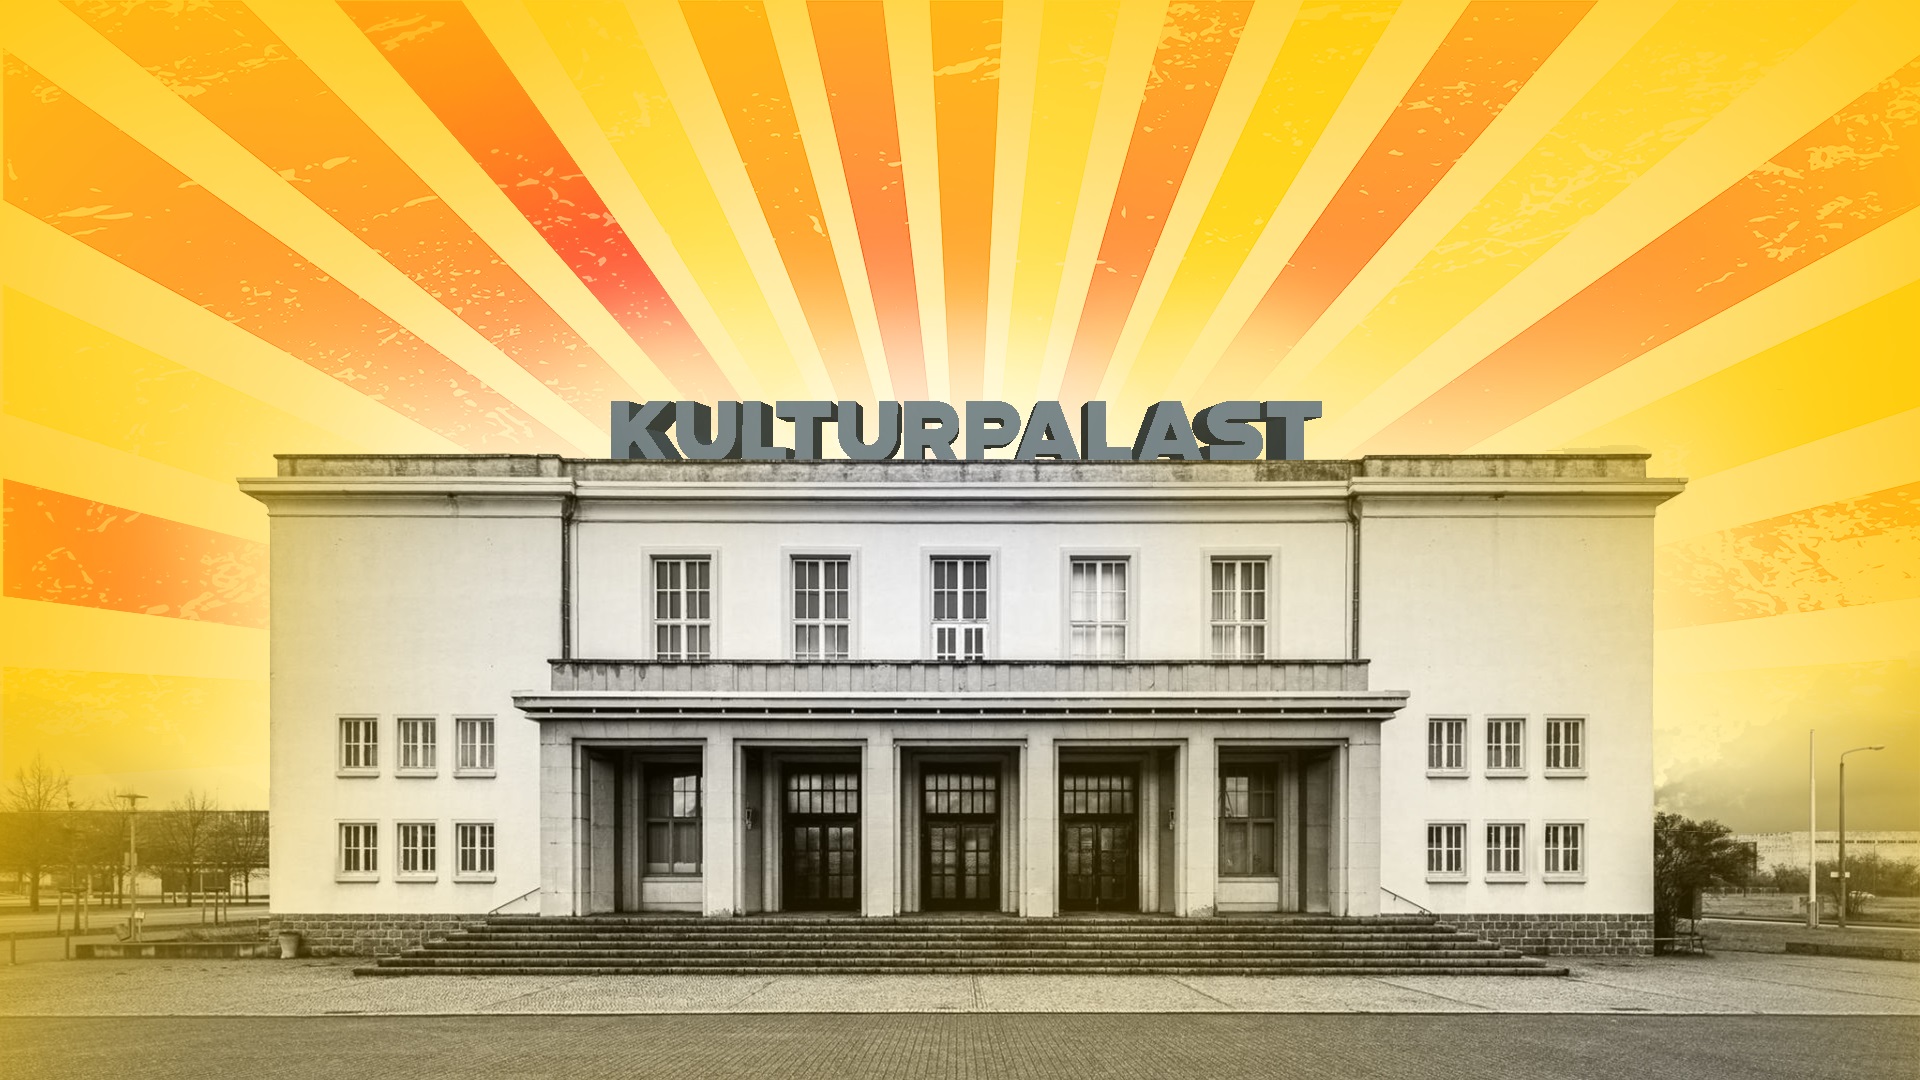 A year in the palace - Bitterfeld and the East Art Festival: Documentation available in ARD-Media library